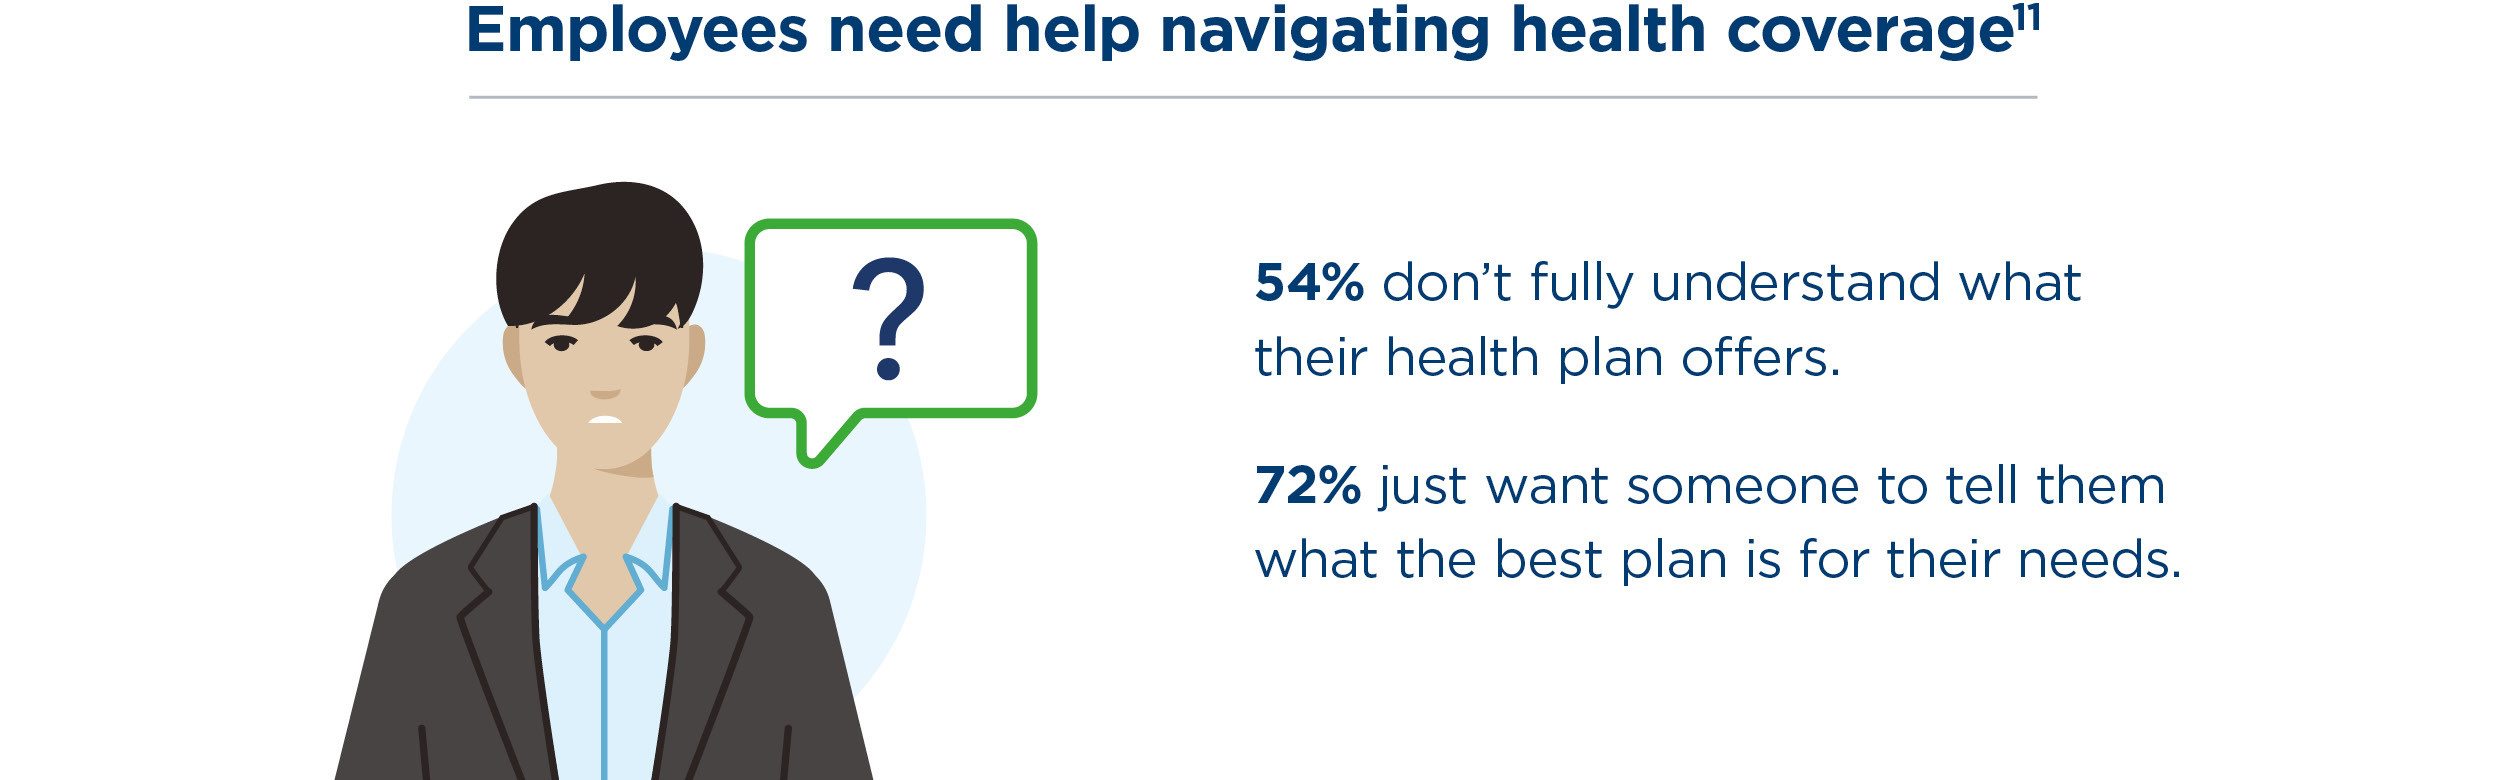 54% of employees don’t fully understand what their health plan offers. 72% just want someone to tell them what the best plan is for their needs.